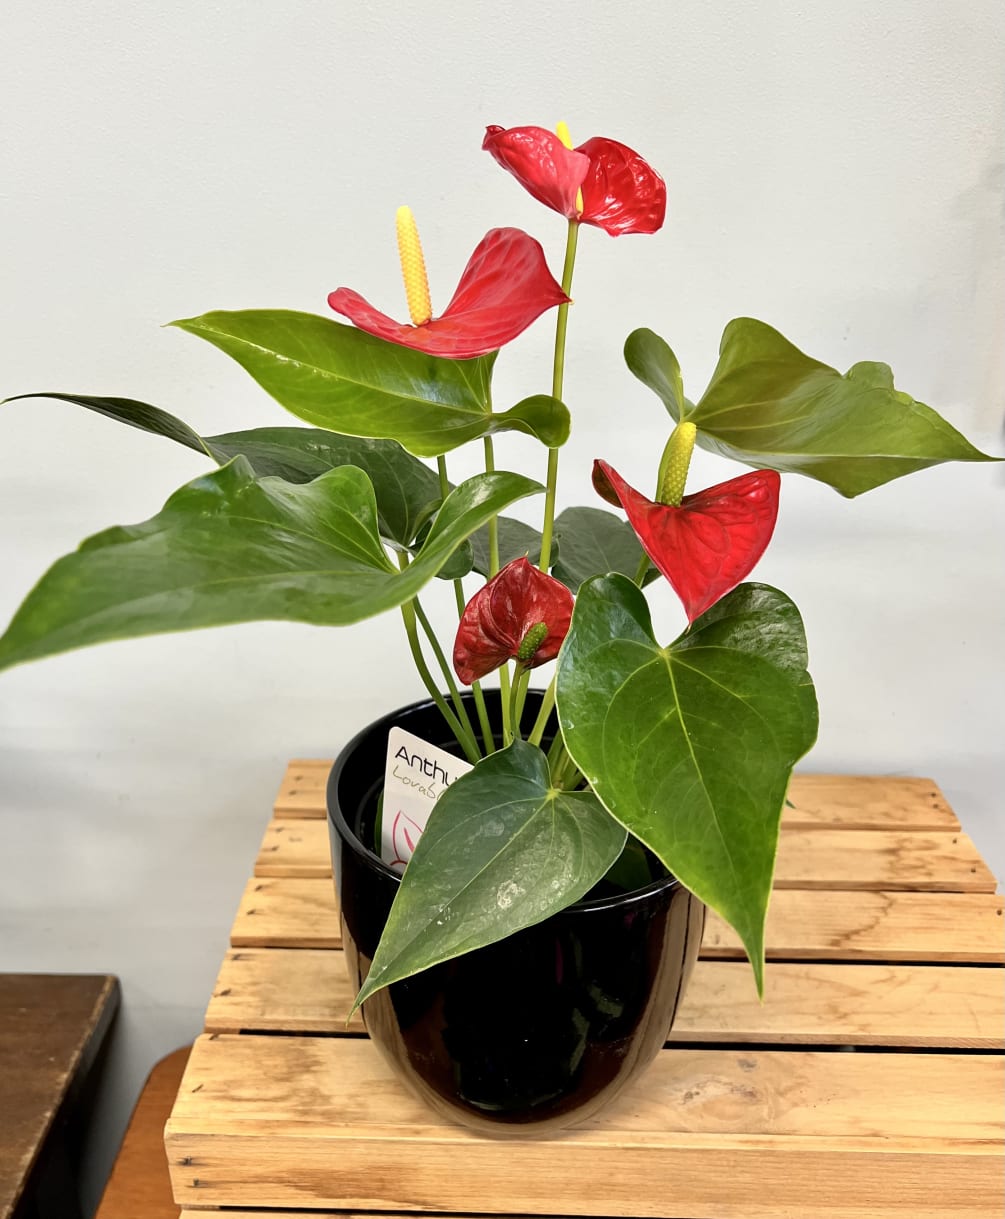 Anthuriums like a well-lighted place, but not direct sunlight. They love warmth